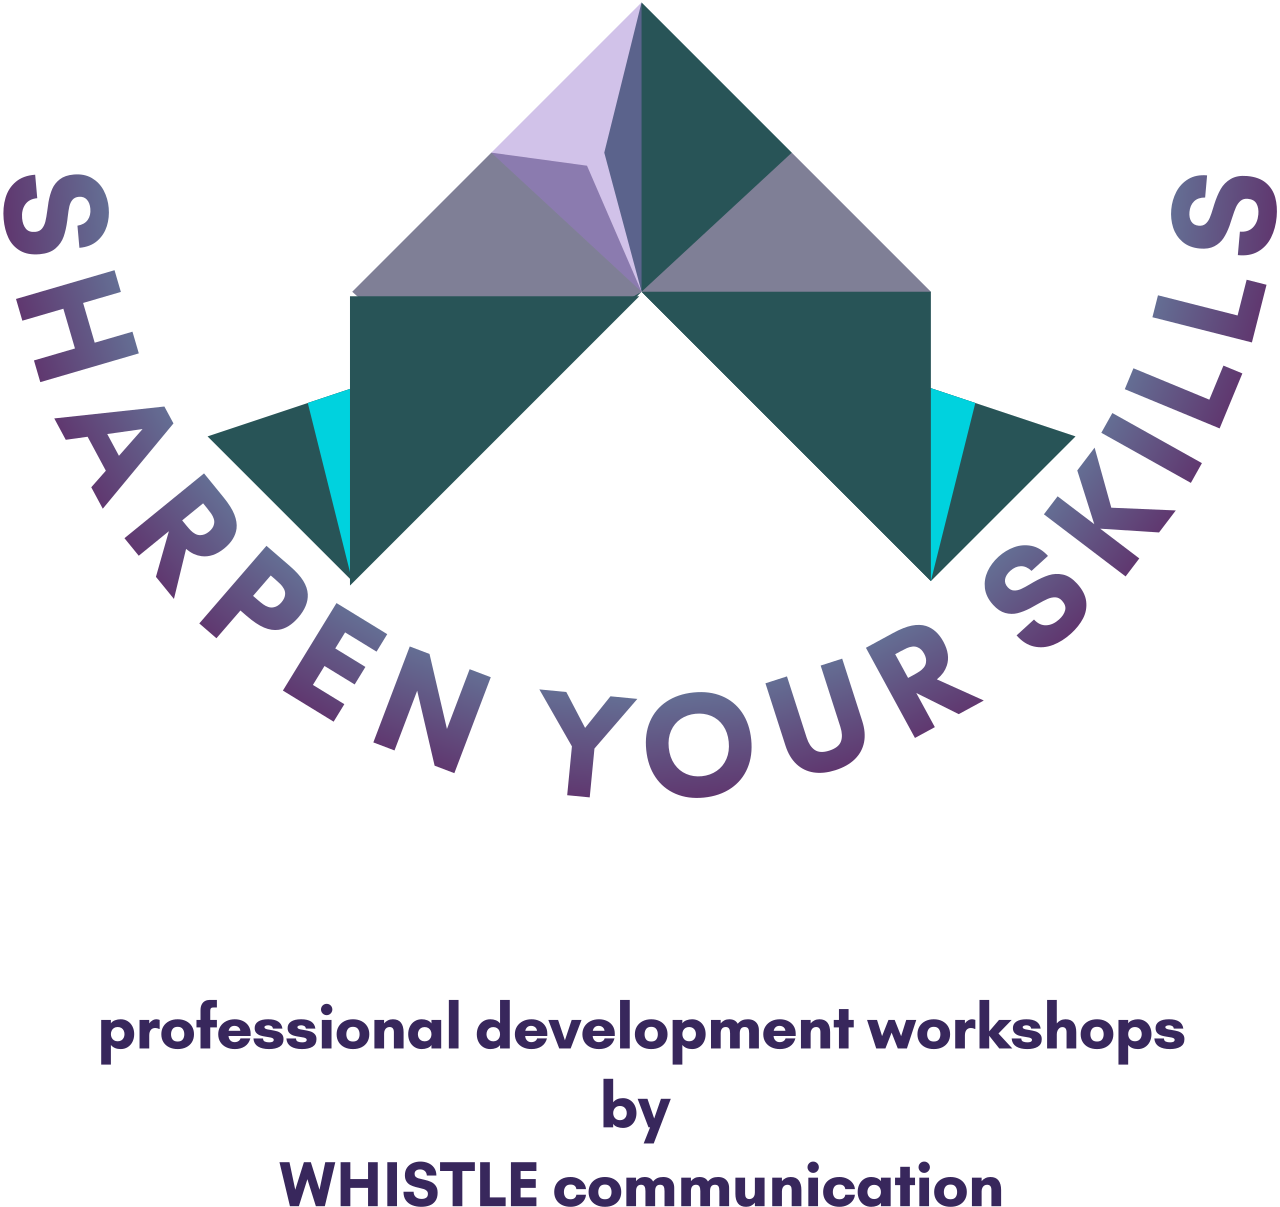 SHARPEN YOUR SKILLS's web page